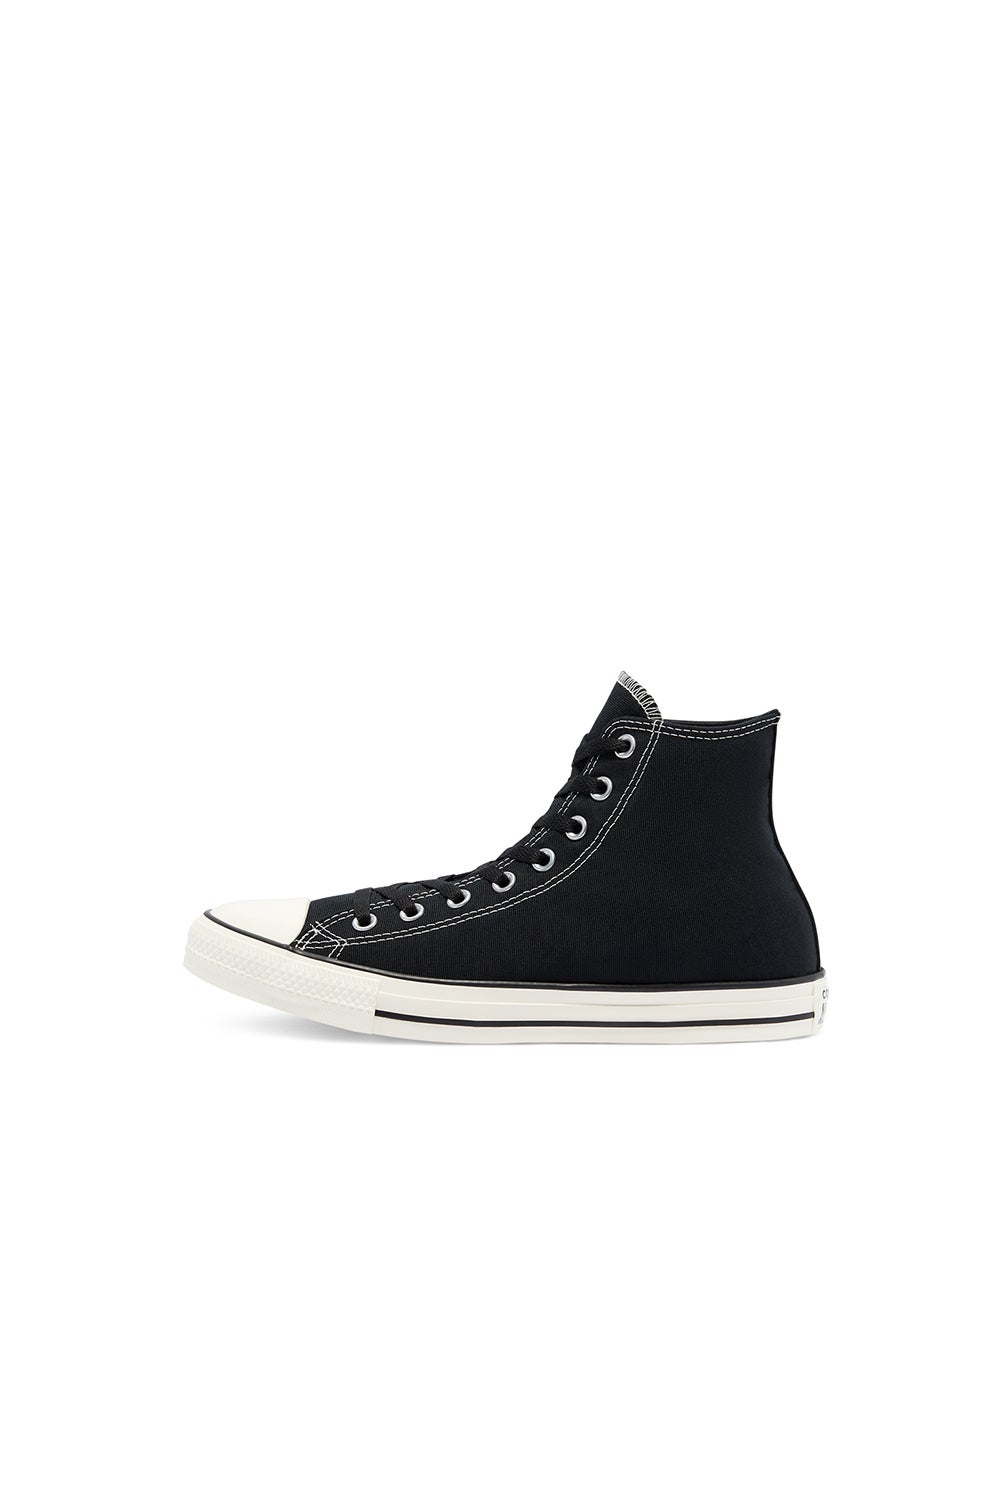 Converse Chuck Taylor All Star National Parks Patch High Top Black